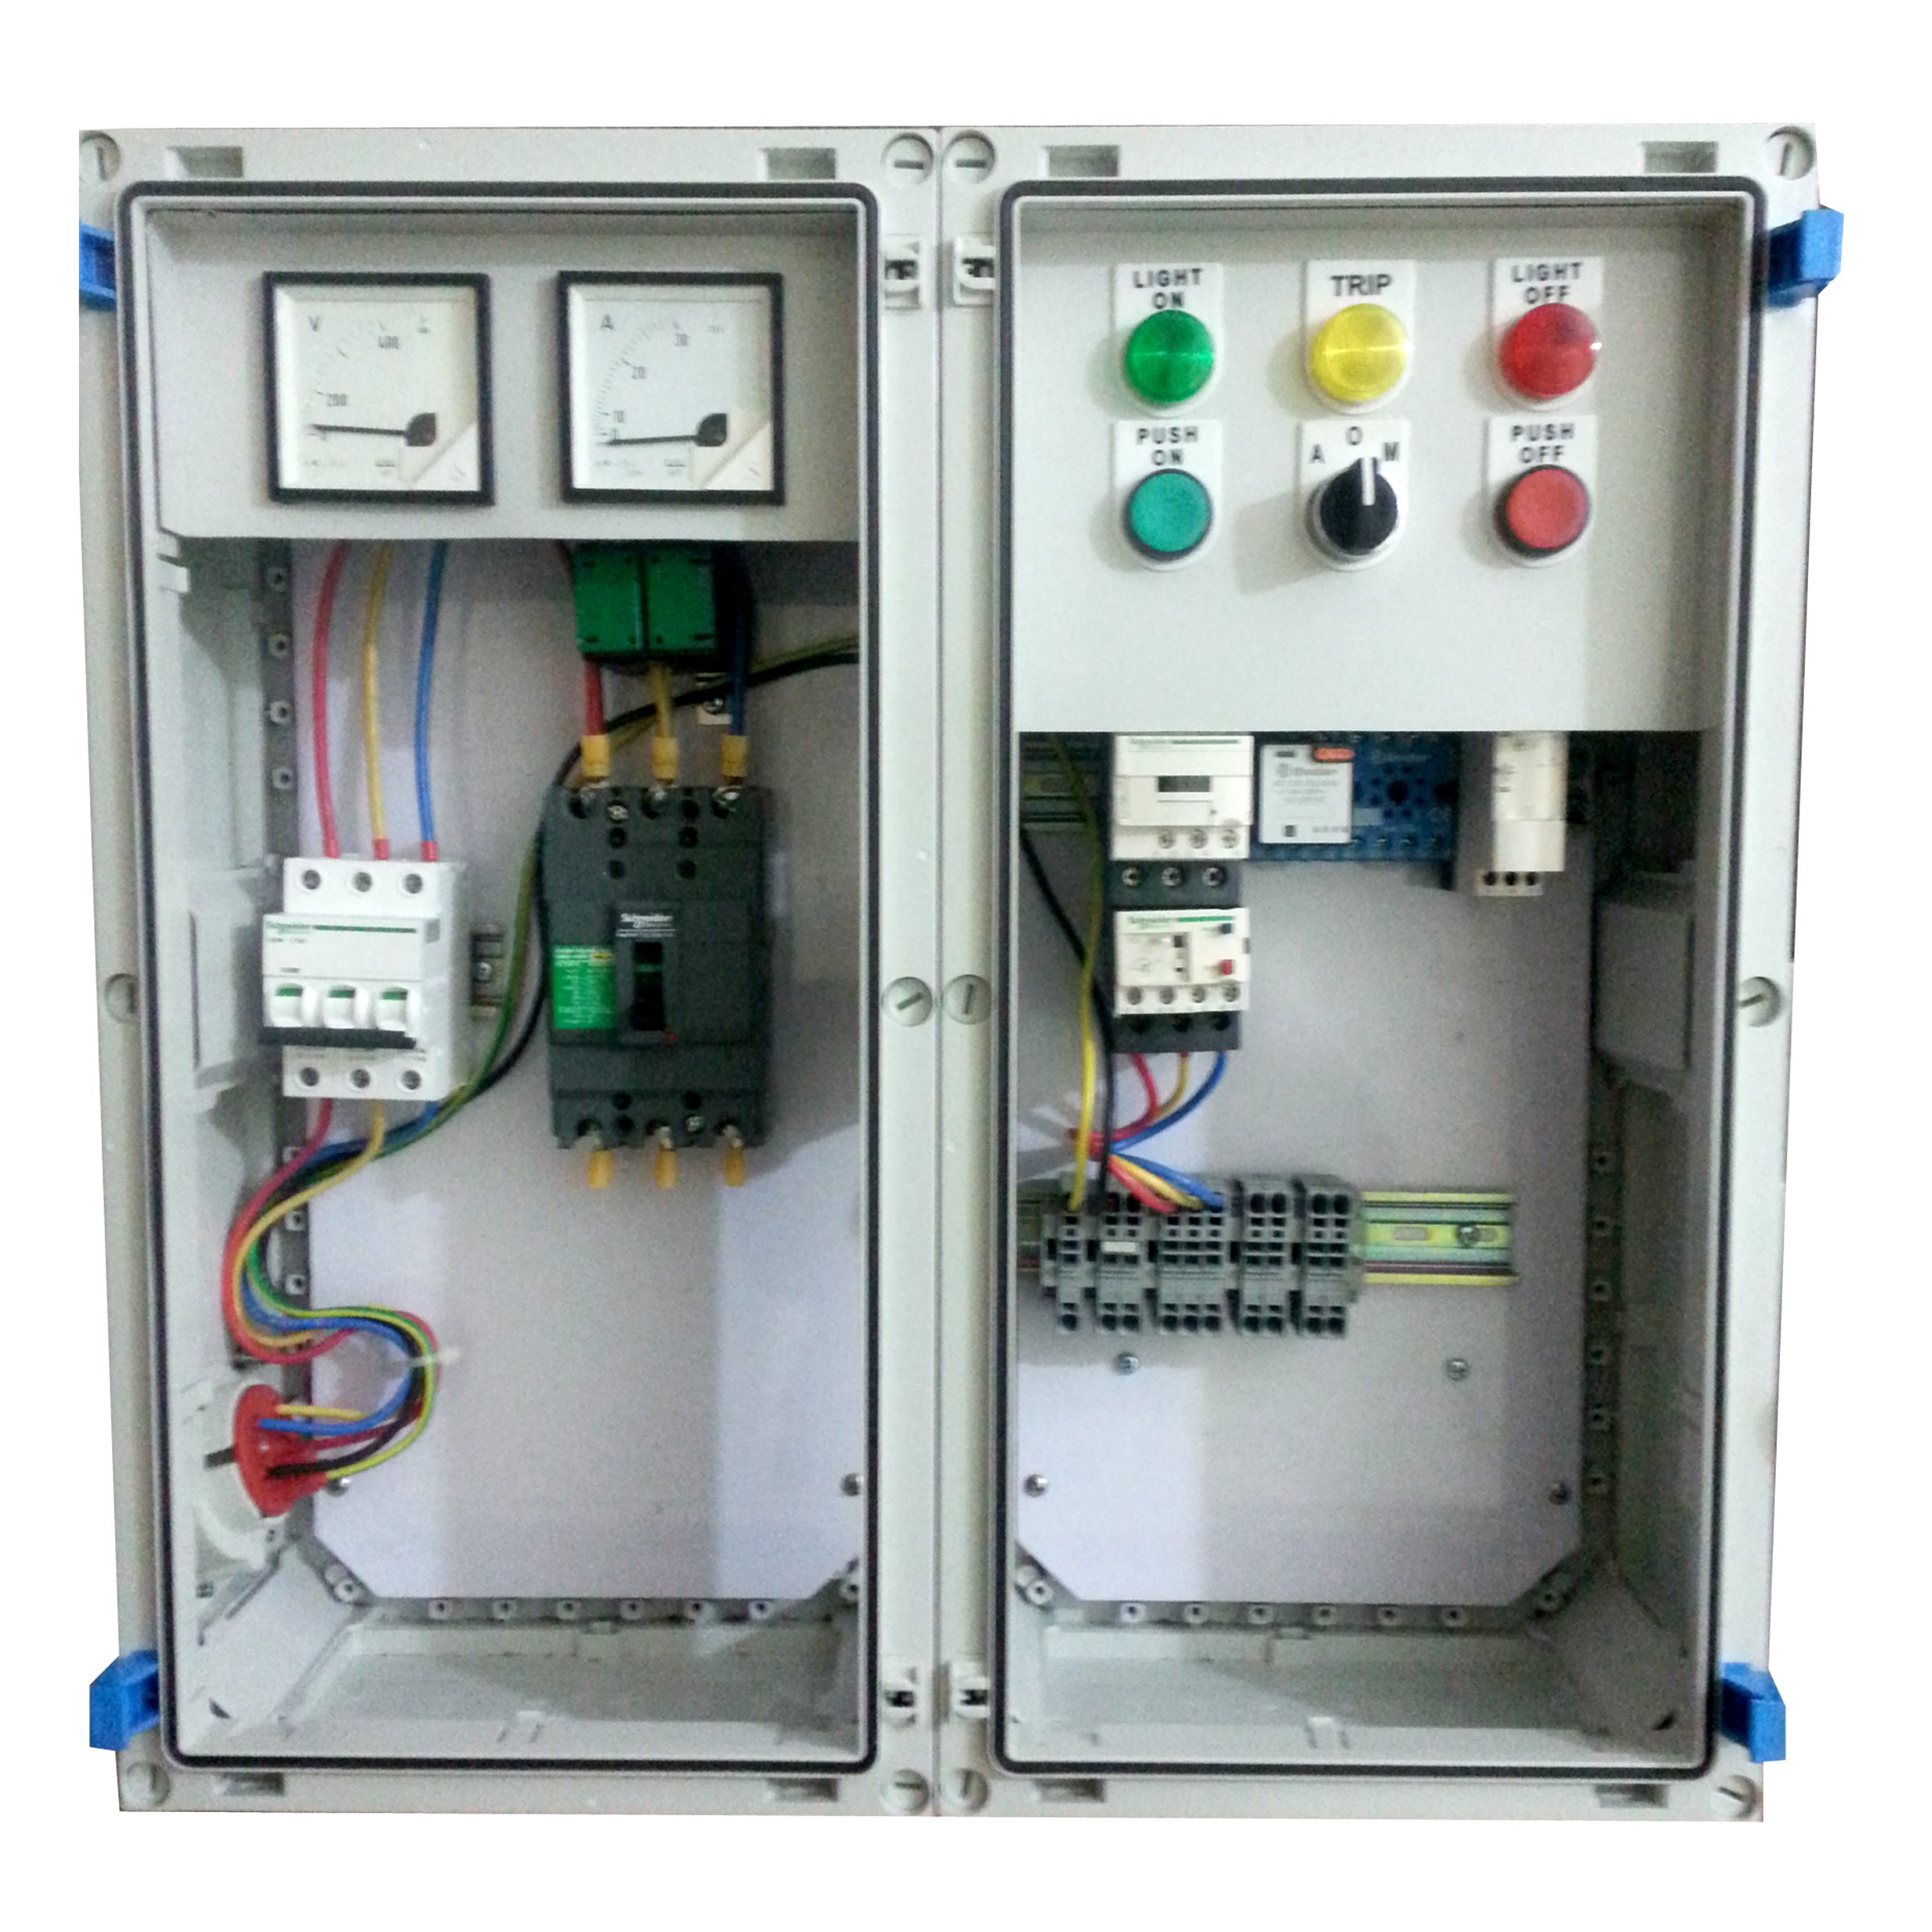 An image of electrical equipment protected by Sahamid's Protection Class II Solutions, ensuring safety against electric shock.